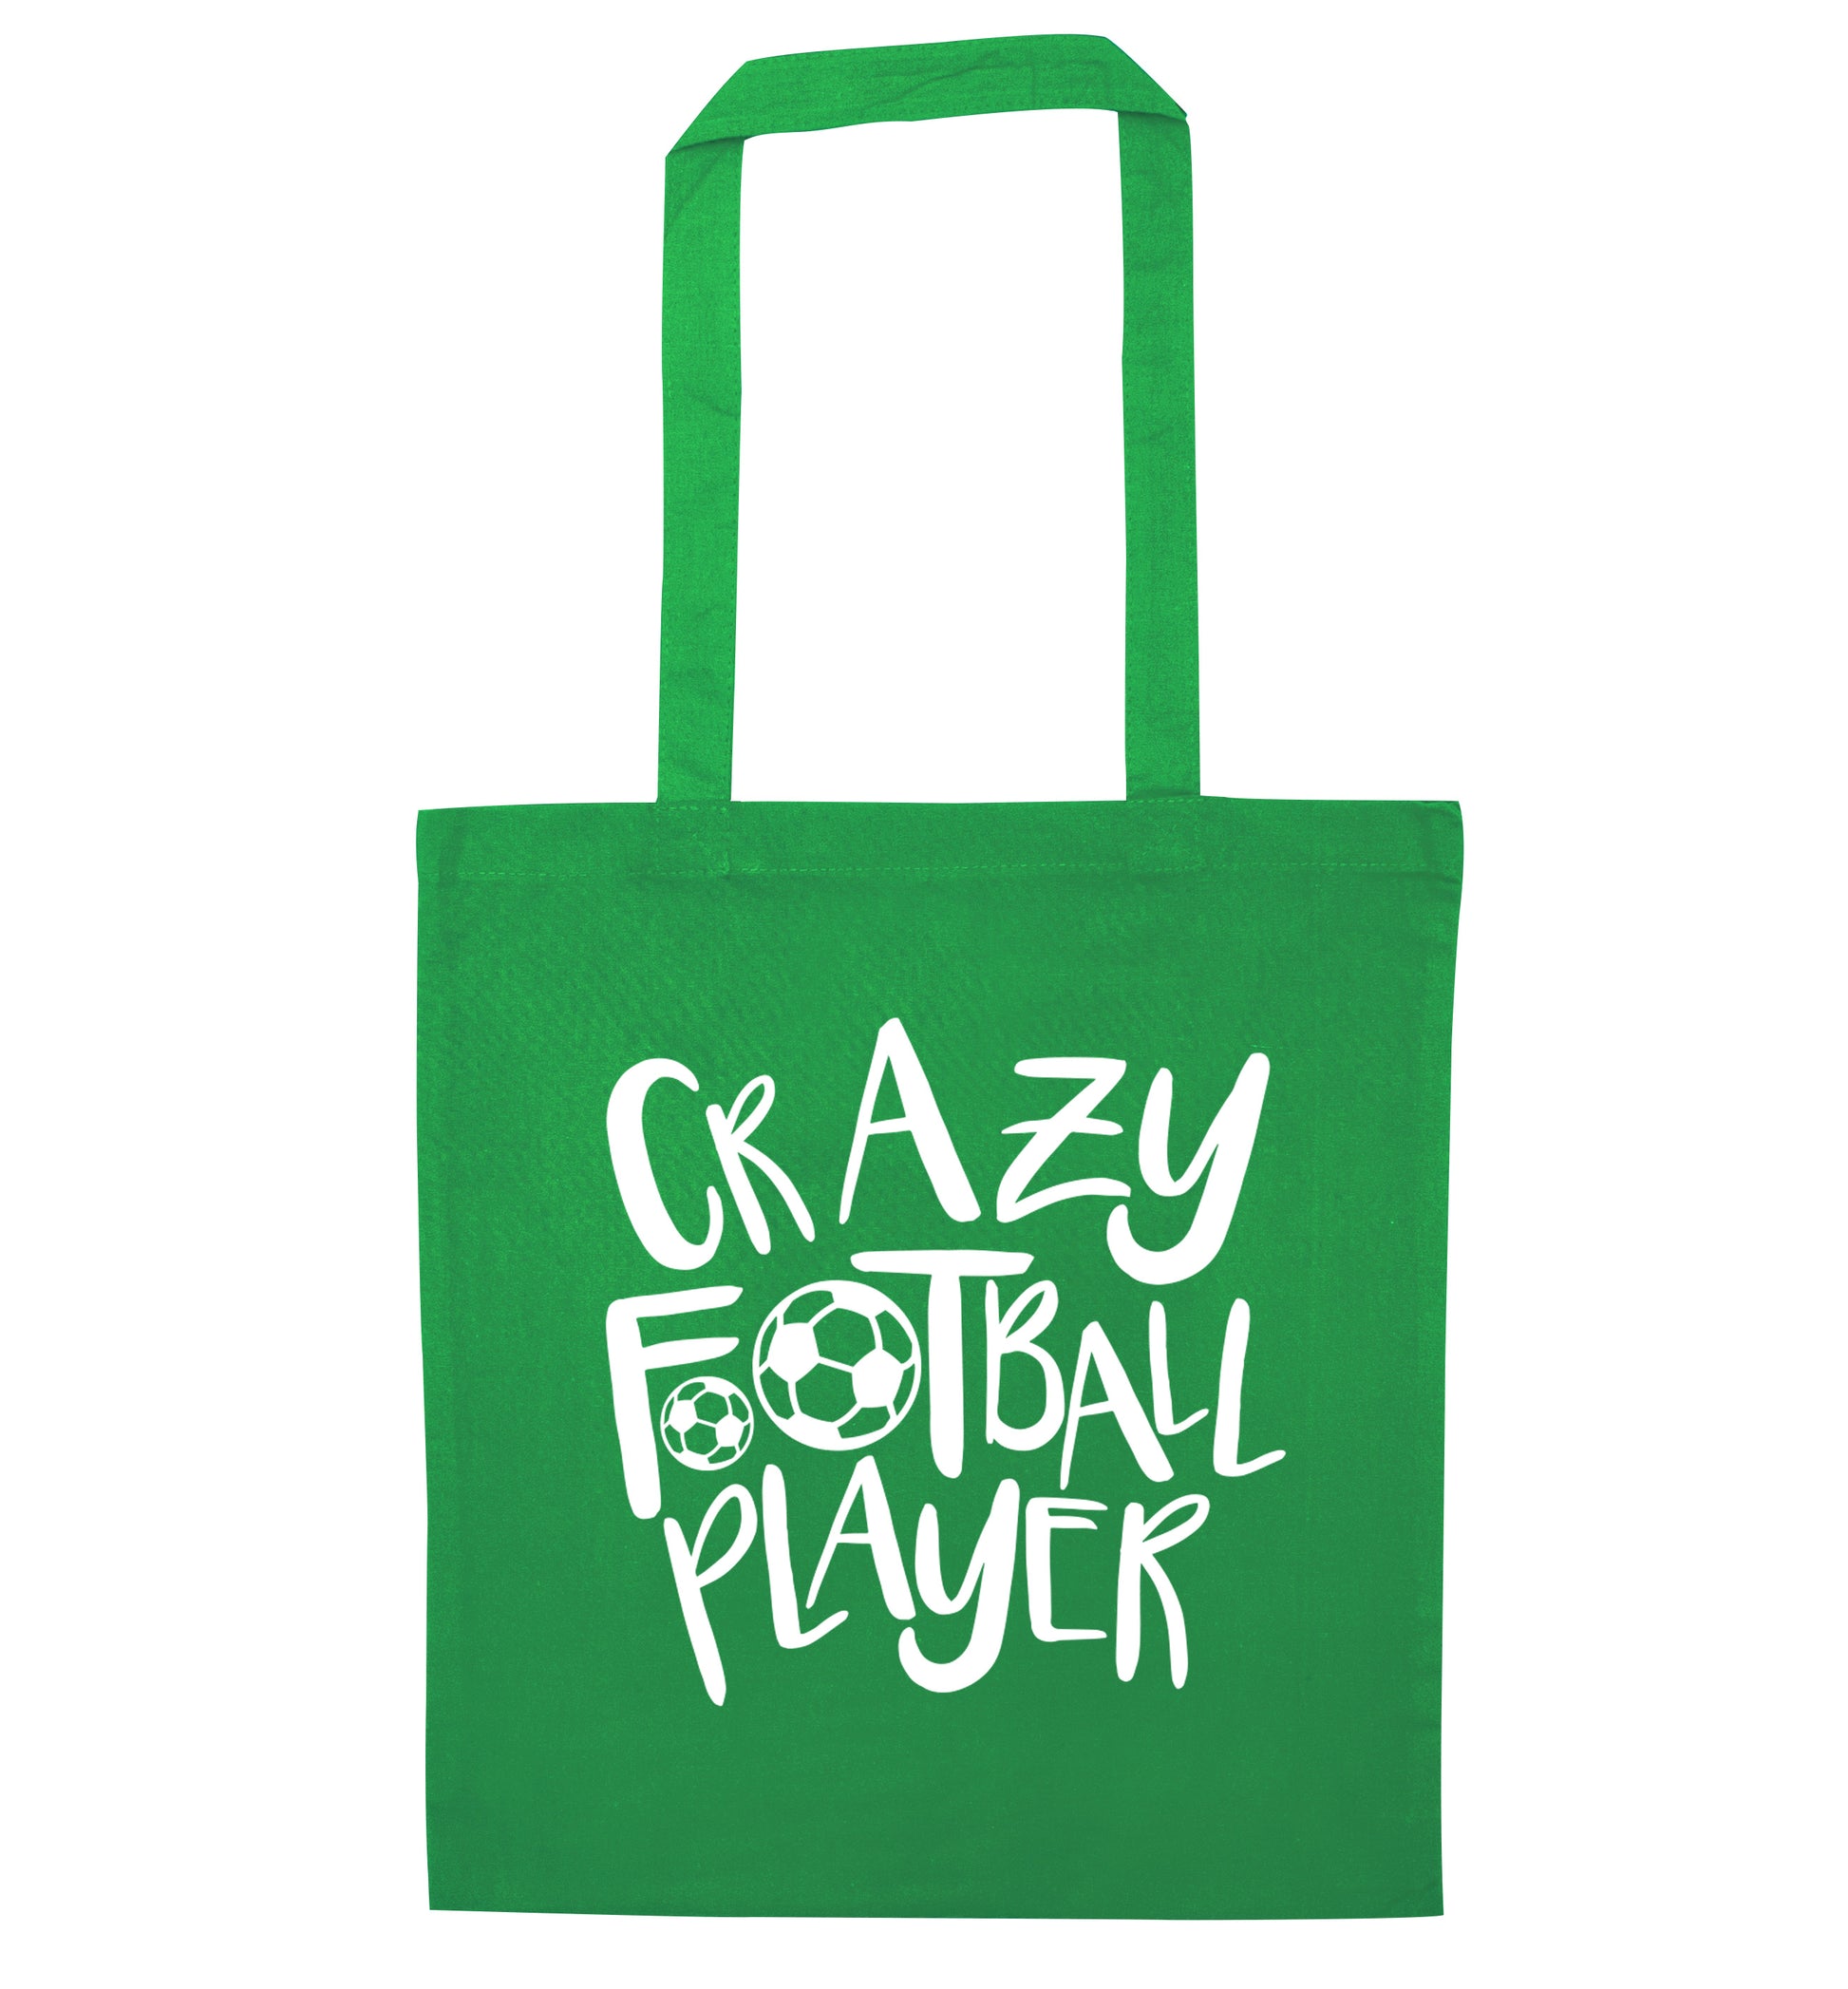 Crazy football player green tote bag